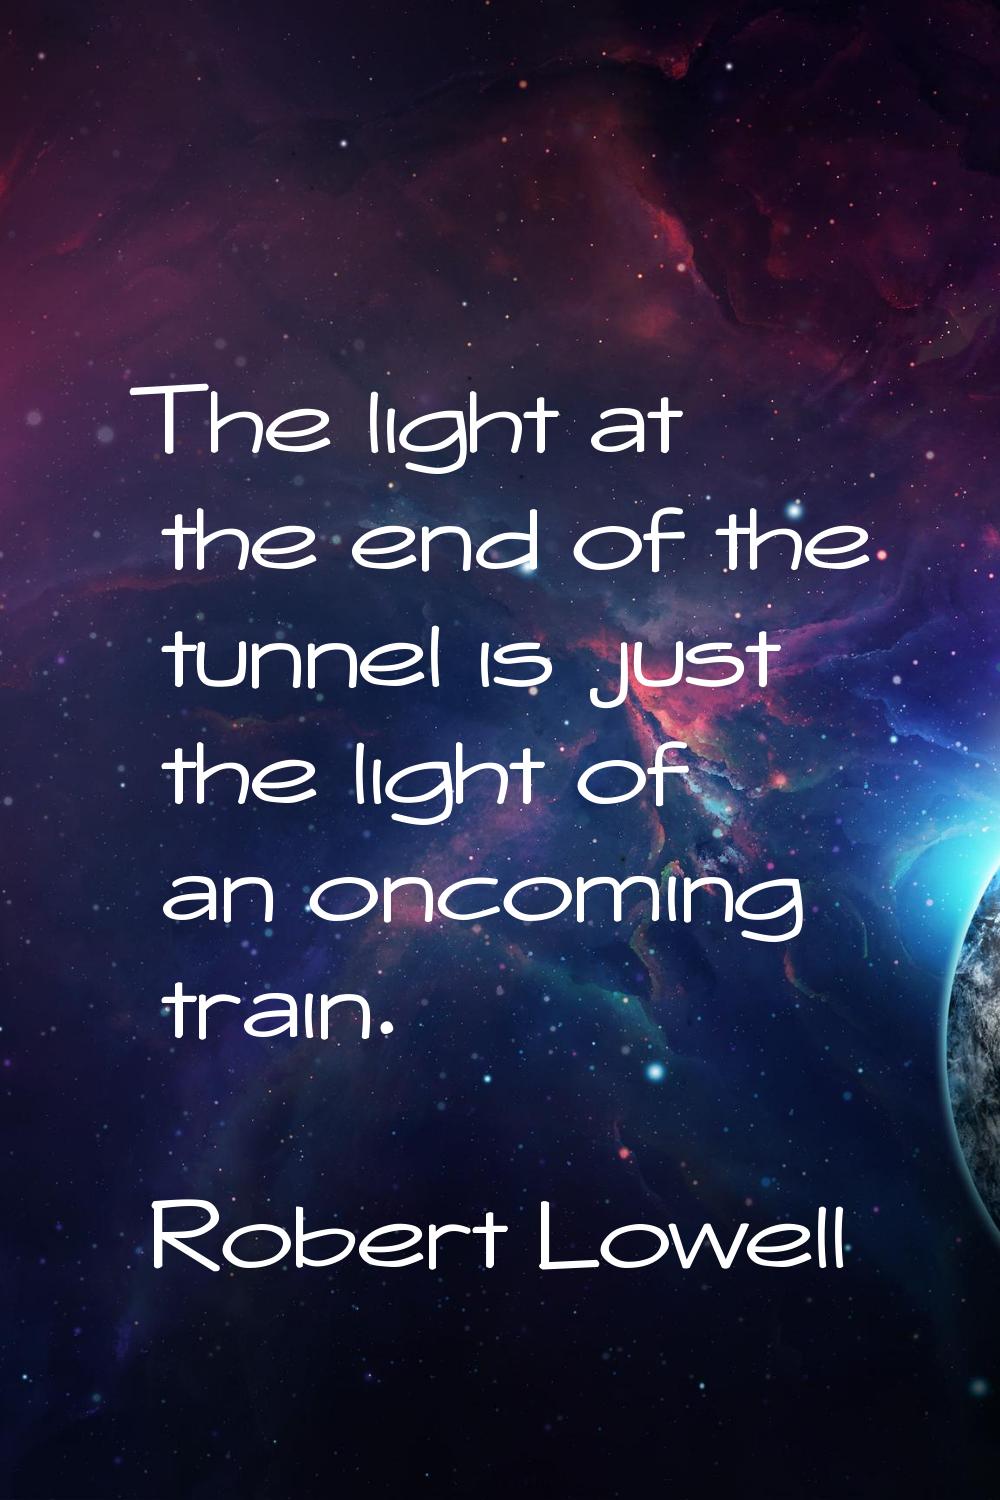 The light at the end of the tunnel is just the light of an oncoming train.